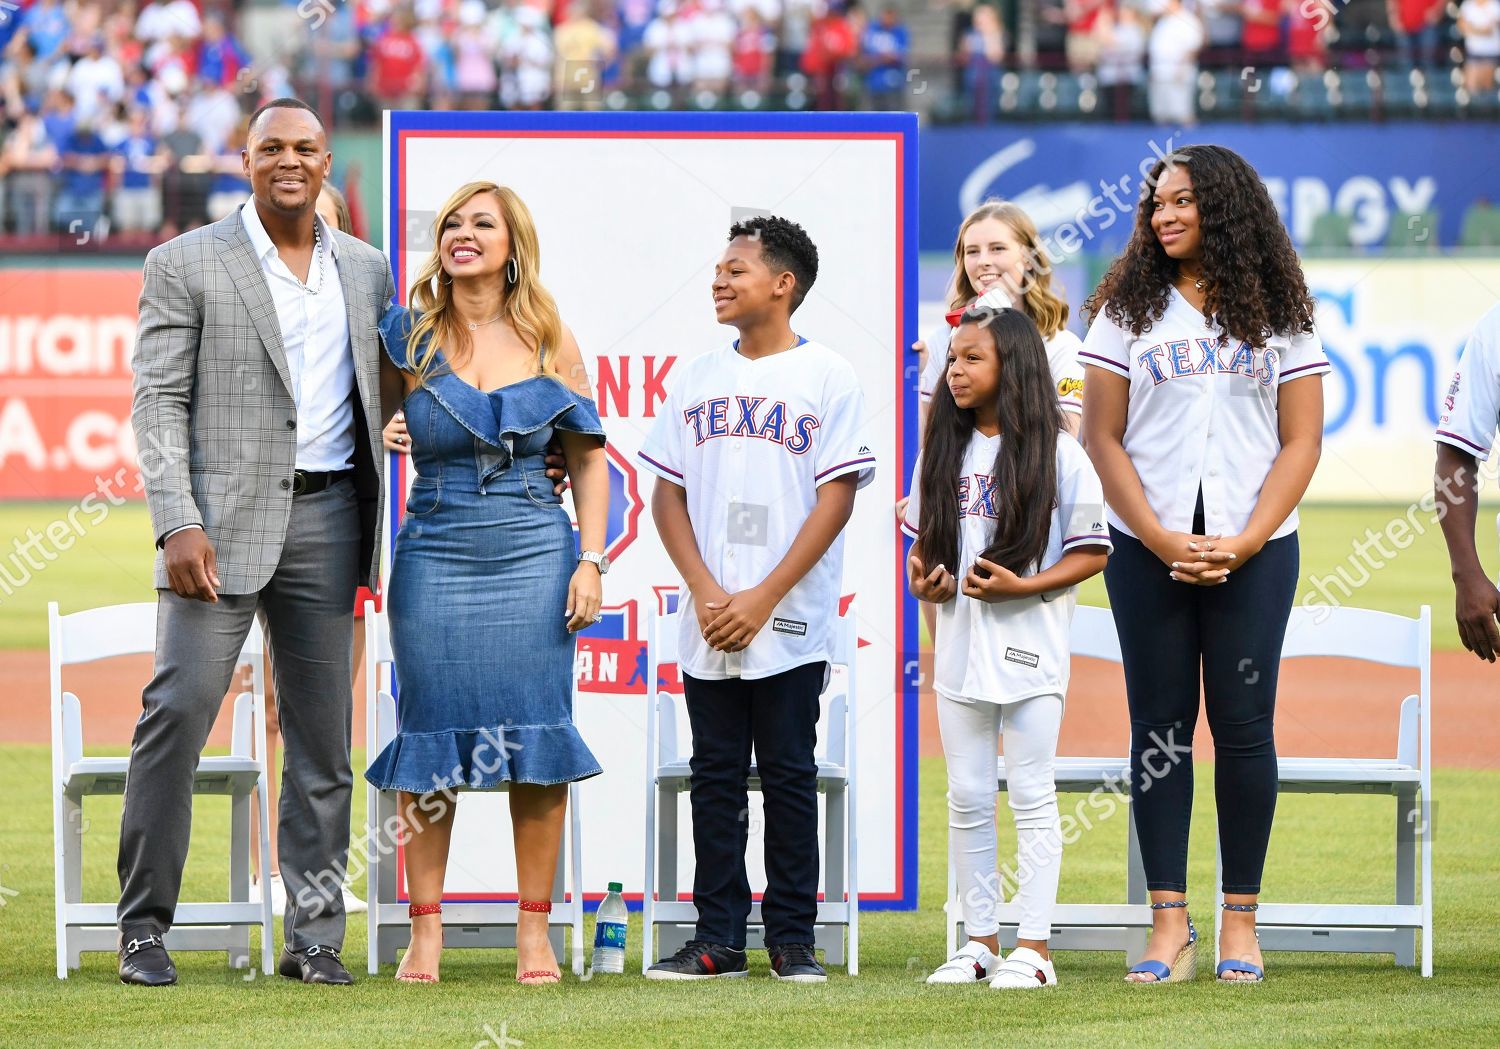 The Rangers are retiring Adrian Beltre's number